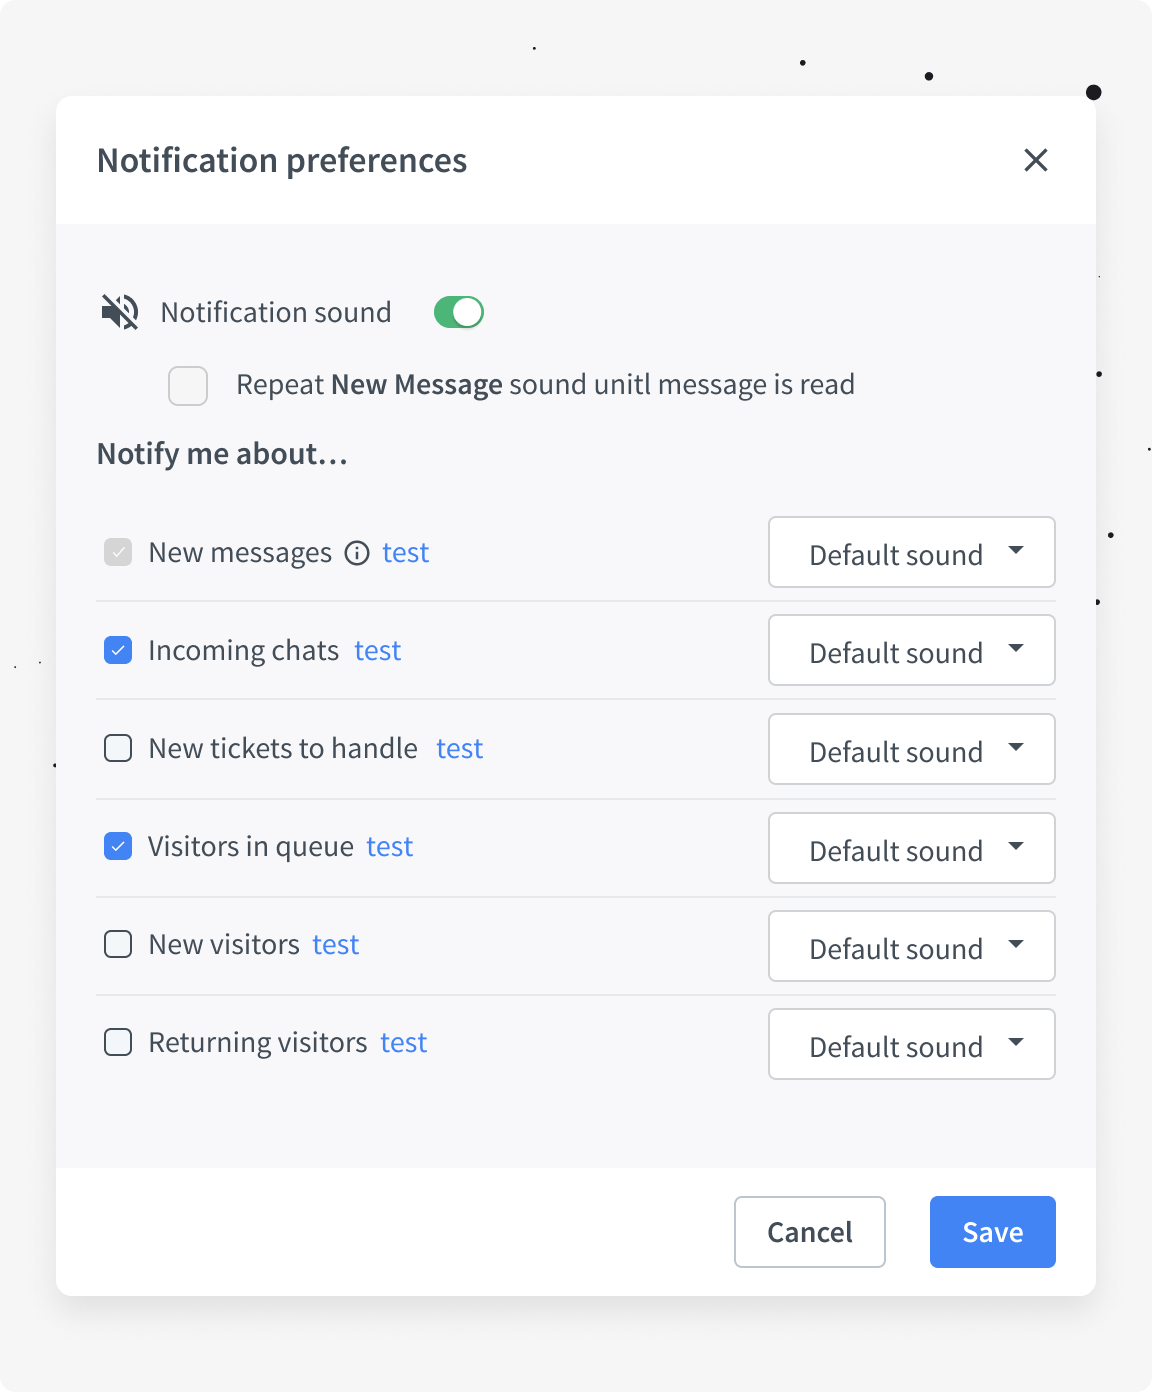 Notification preferences view in LiveChat app